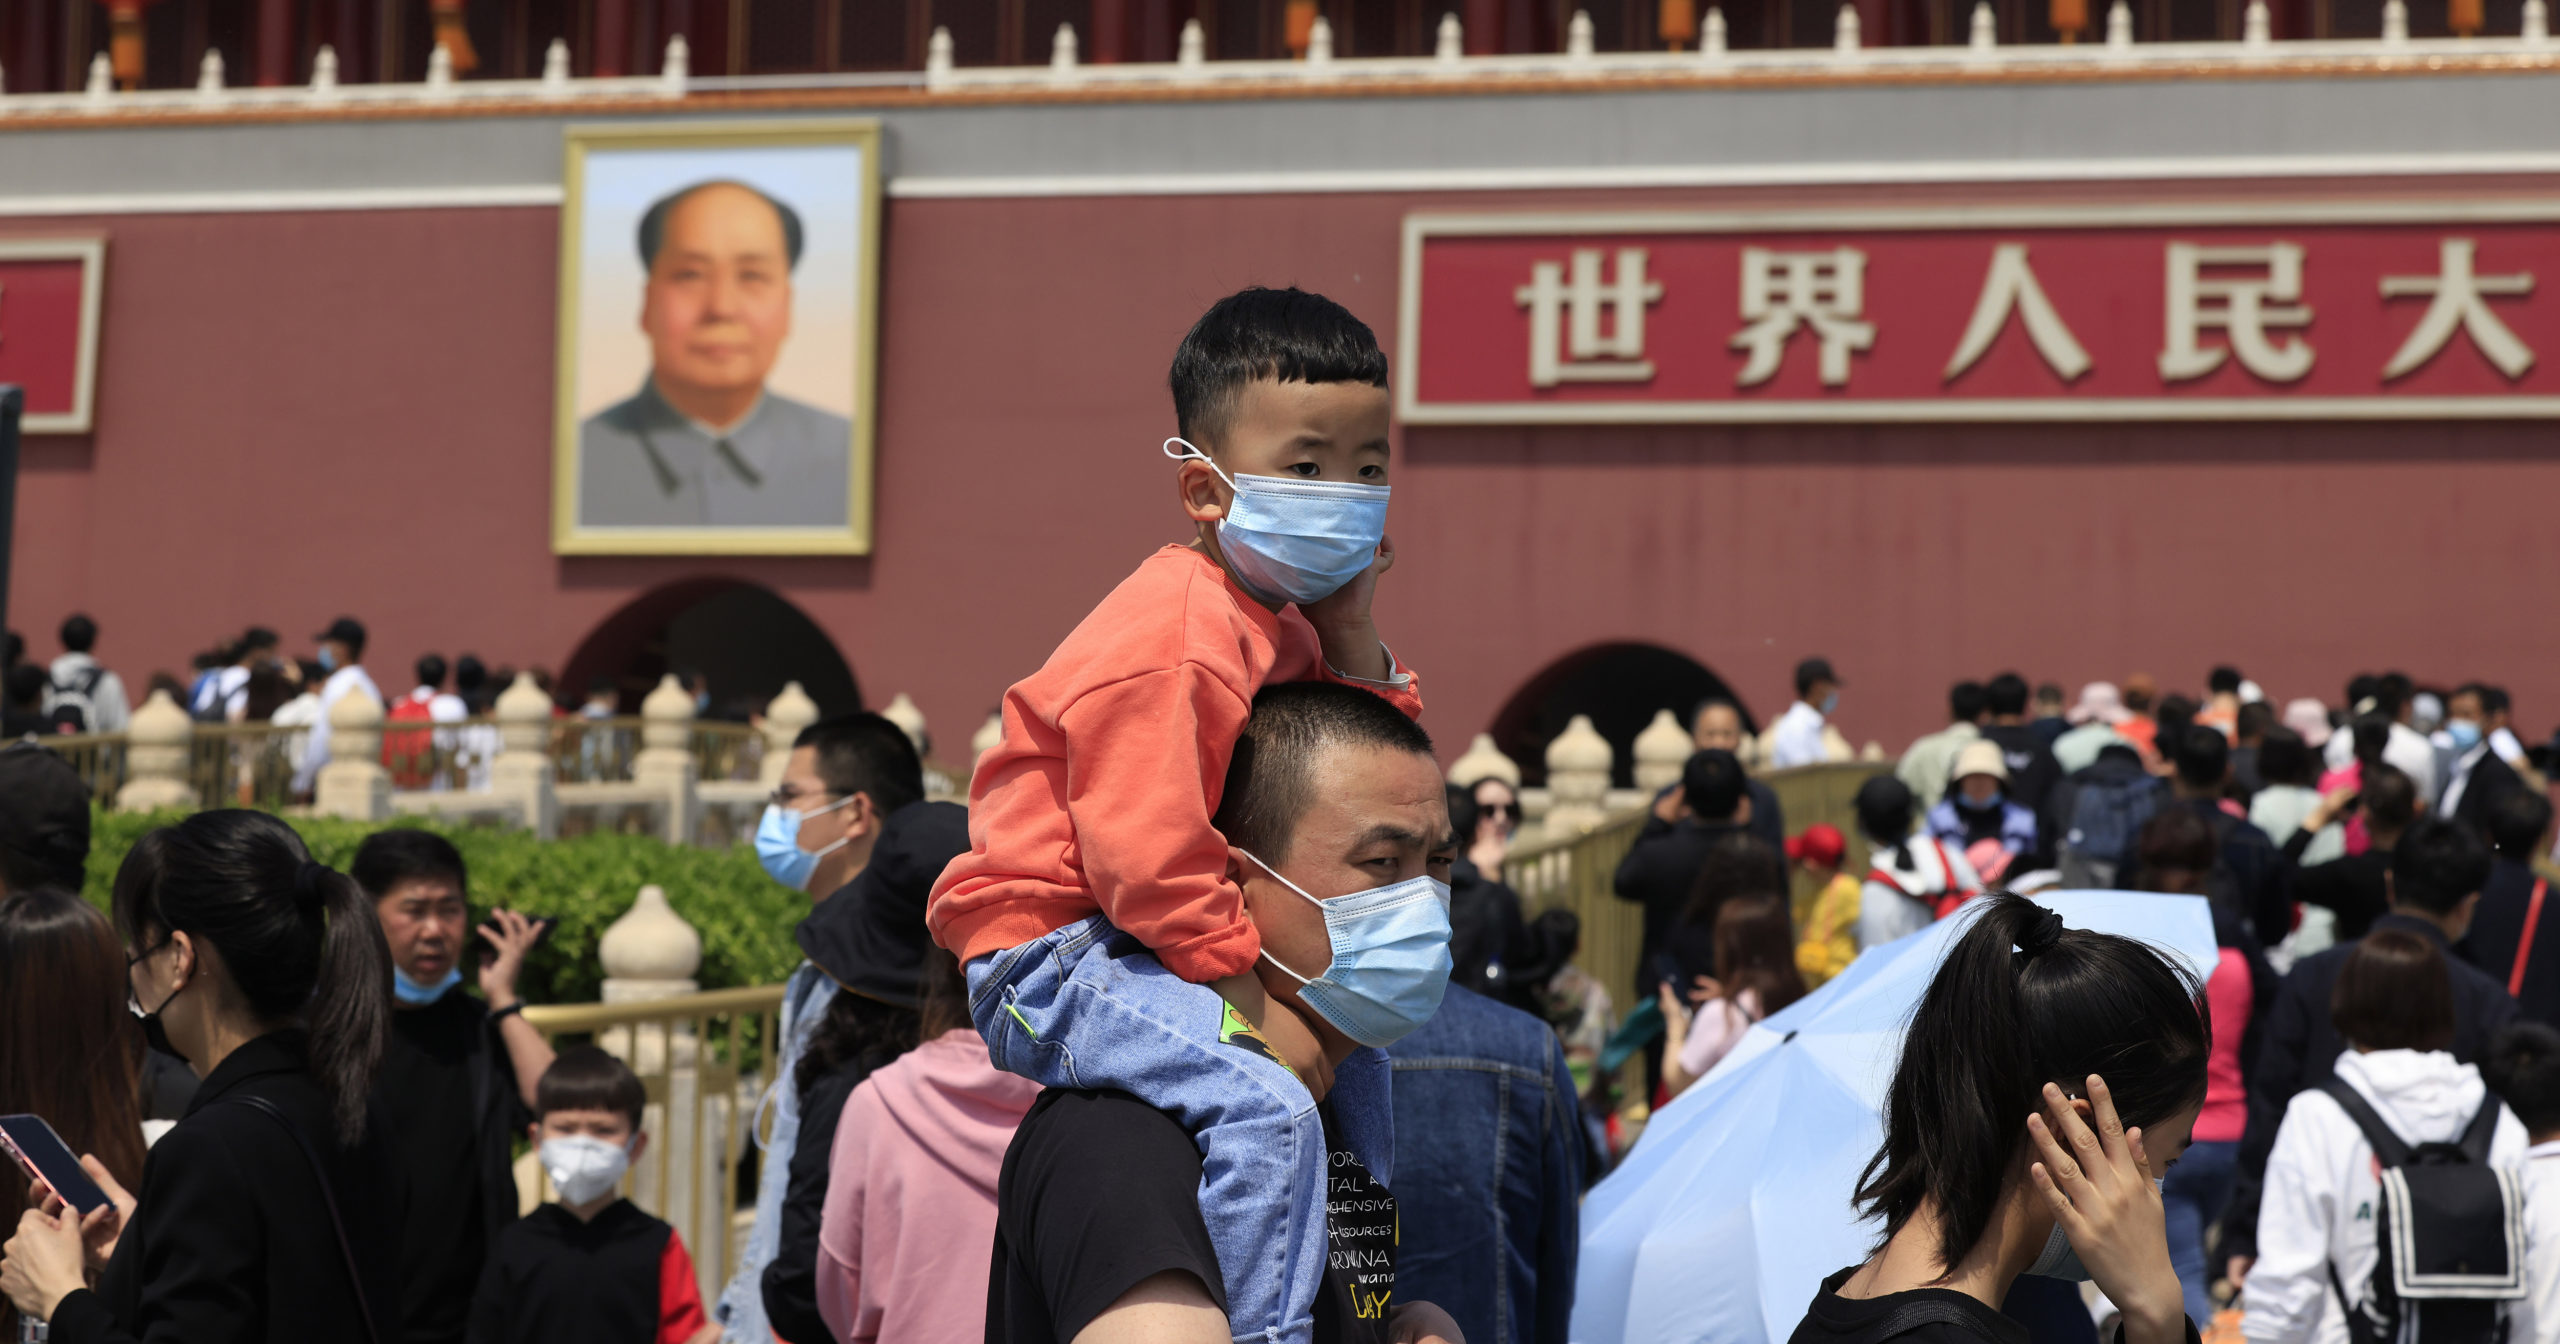 In this May 3, 2021, file photo, a man and child wearing masks visit Tiananmen Gate near the portrait of Mao Zedong in Beijing.